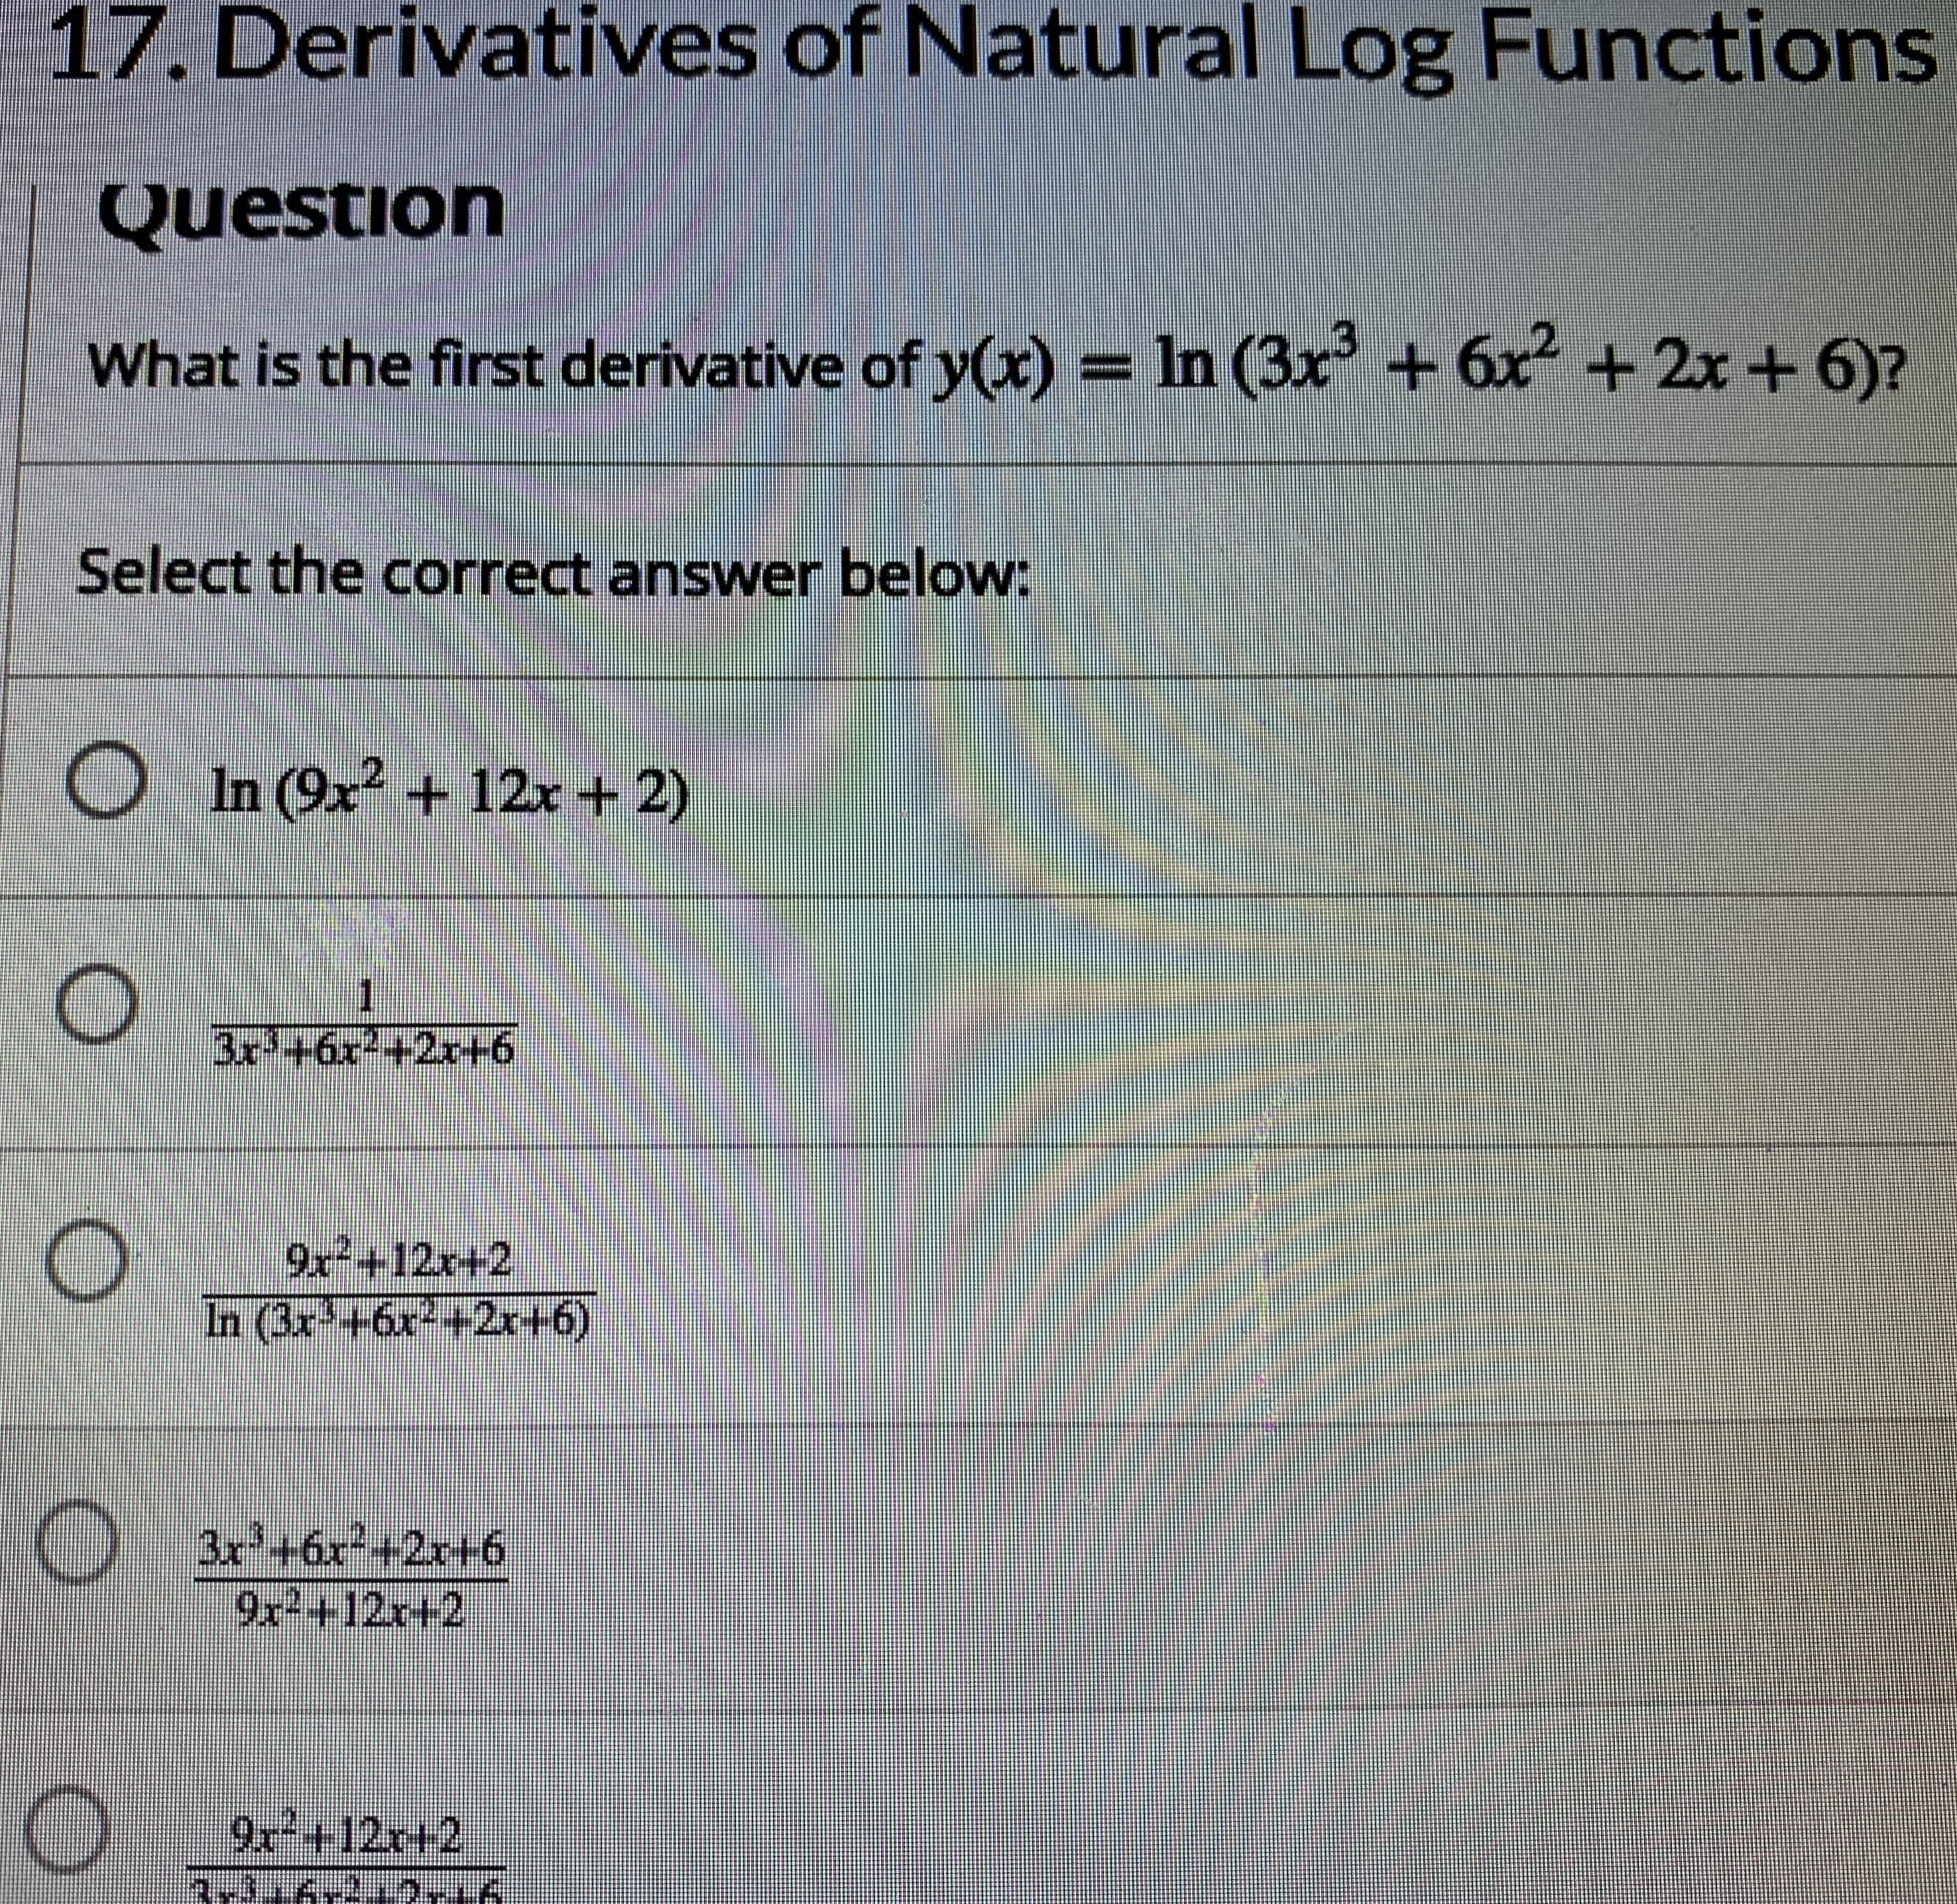 17. Derivatives of Natural Log Functions
Question
What is the first derivative of y(x) = In (3x + 6x +2x+ 6)?
Select the correct answer below:
In (9x + 12+ 2)
1
3x+6x2+2r+6
कम्बन्ययमल
9x+12x+2
In (3x+6x-+2r+6)
) 3x+6x²+2r+6
9x2+12r+2
9x+12r+2
